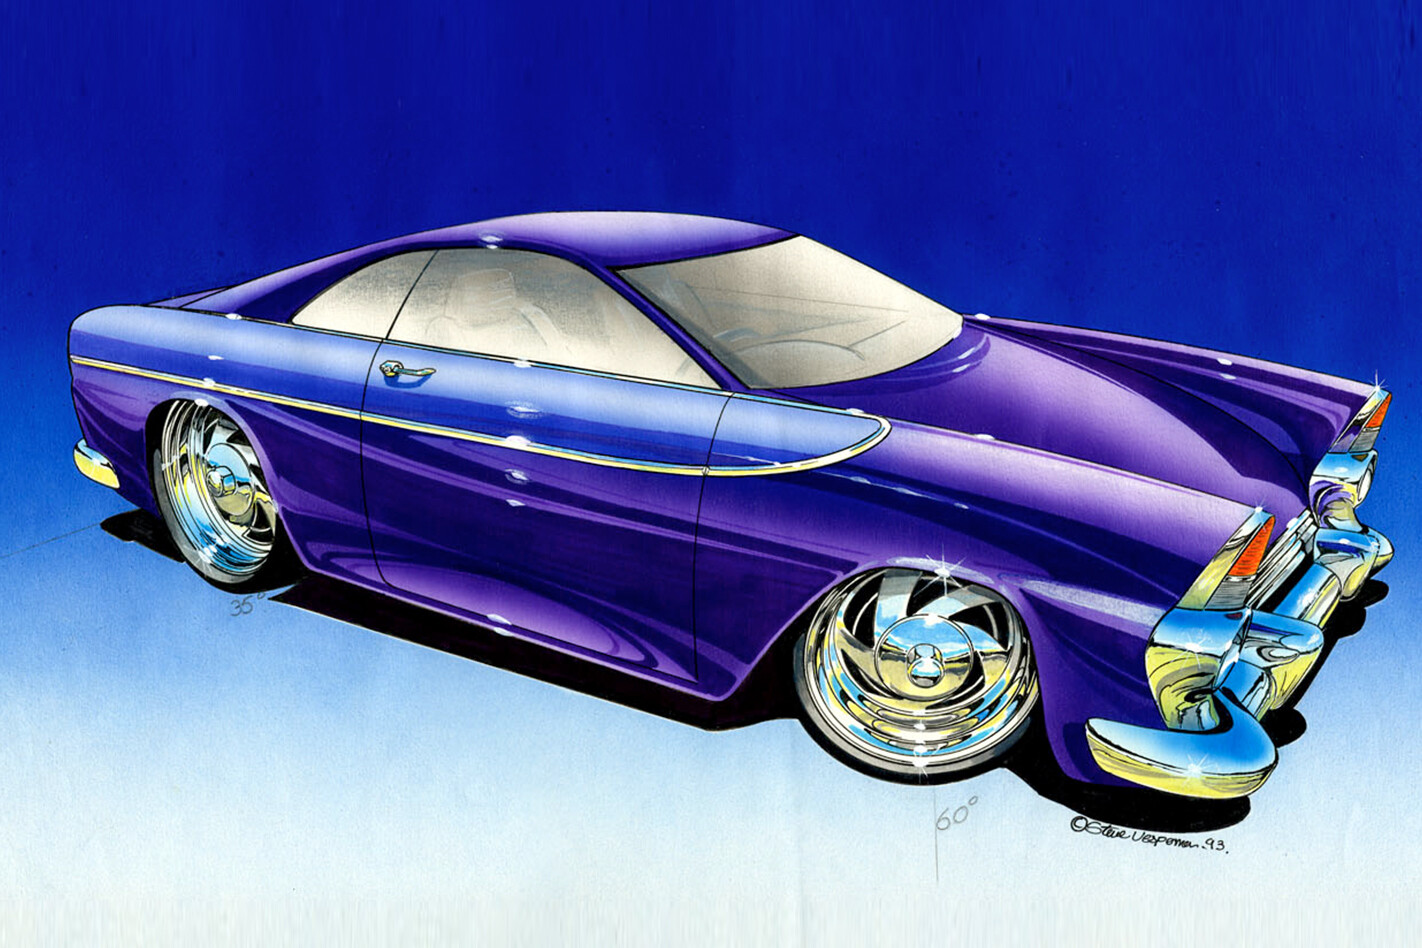 Holden FB Tailspin concept drawing